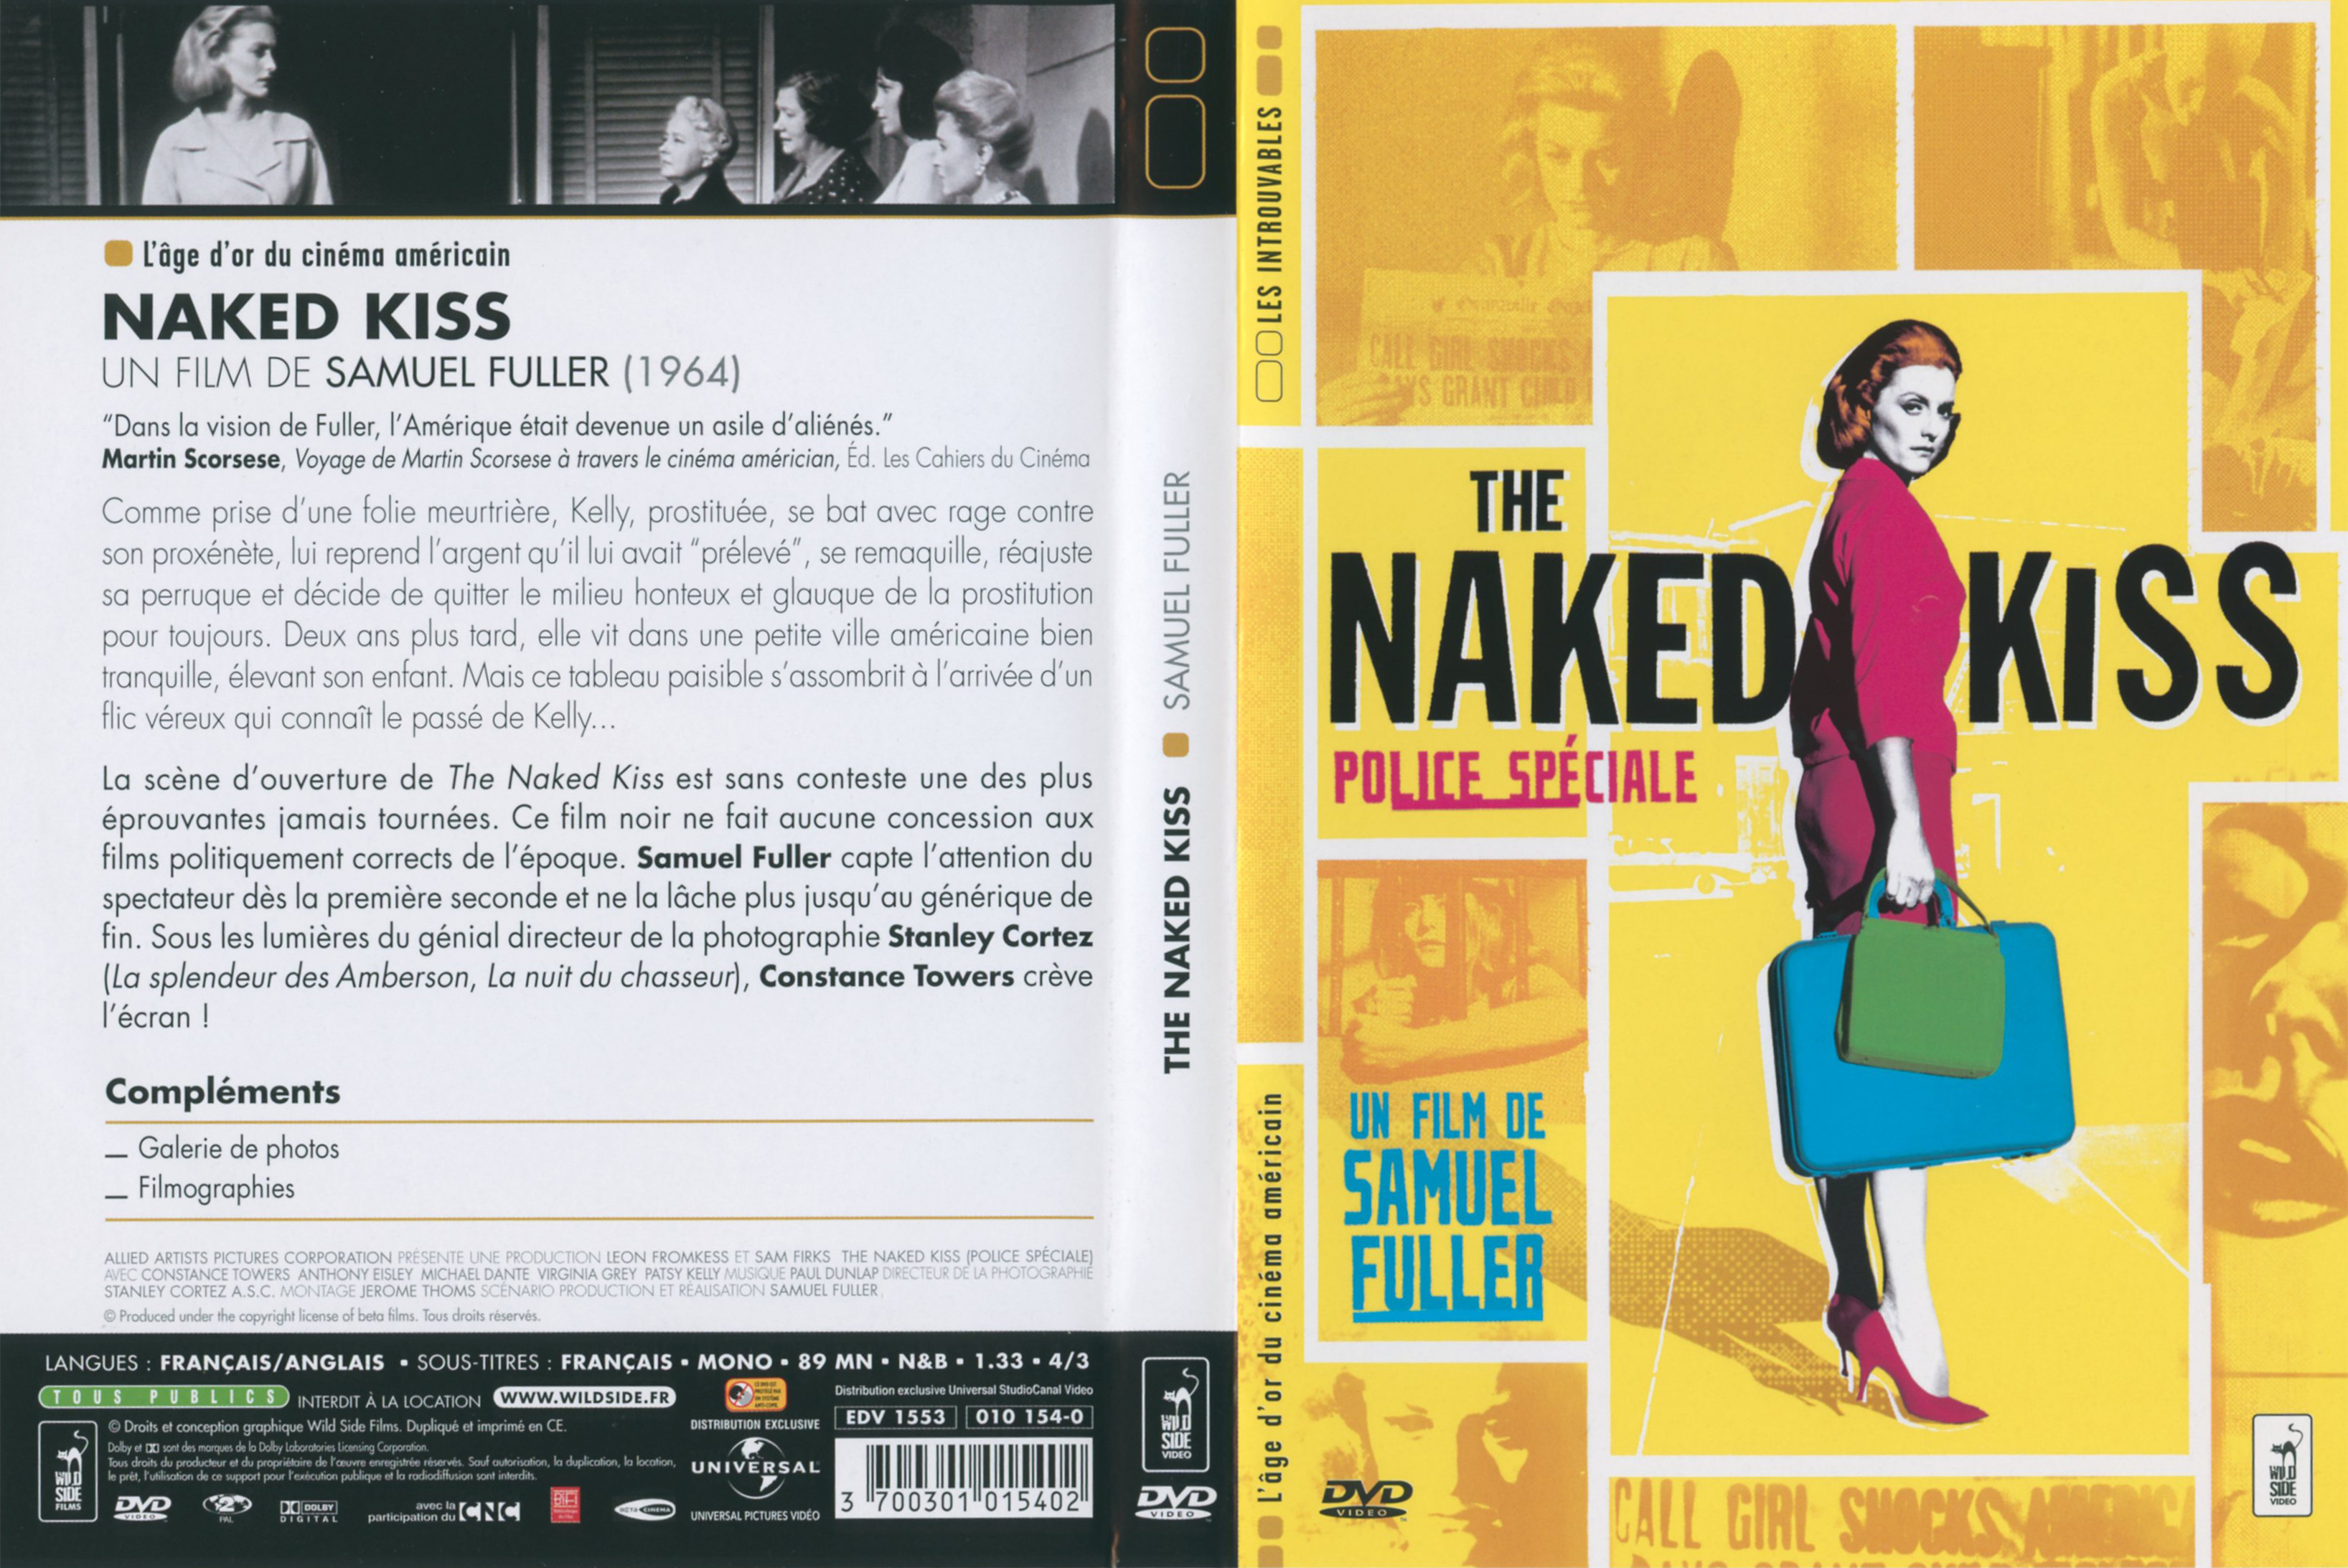 Jaquette DVD Police speciale - the naked kiss